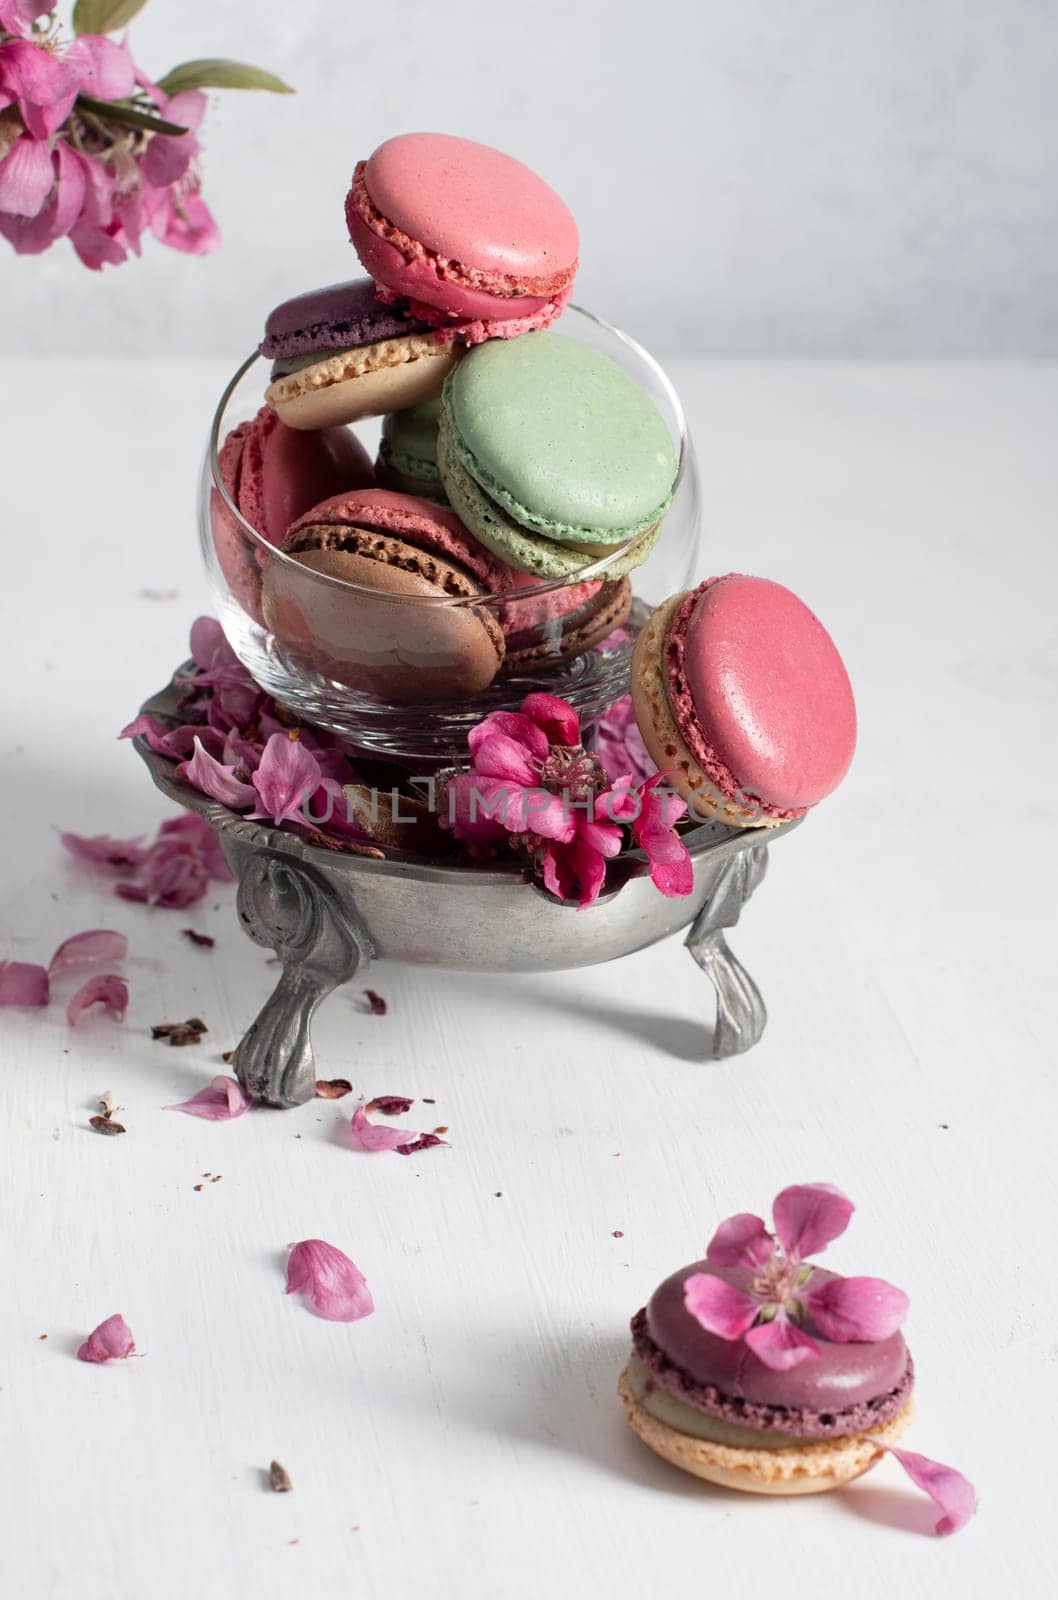 spring still life with colored macaroons and pink apple tree flowers in a pewter vase, colorful sweet food close up. High quality photo